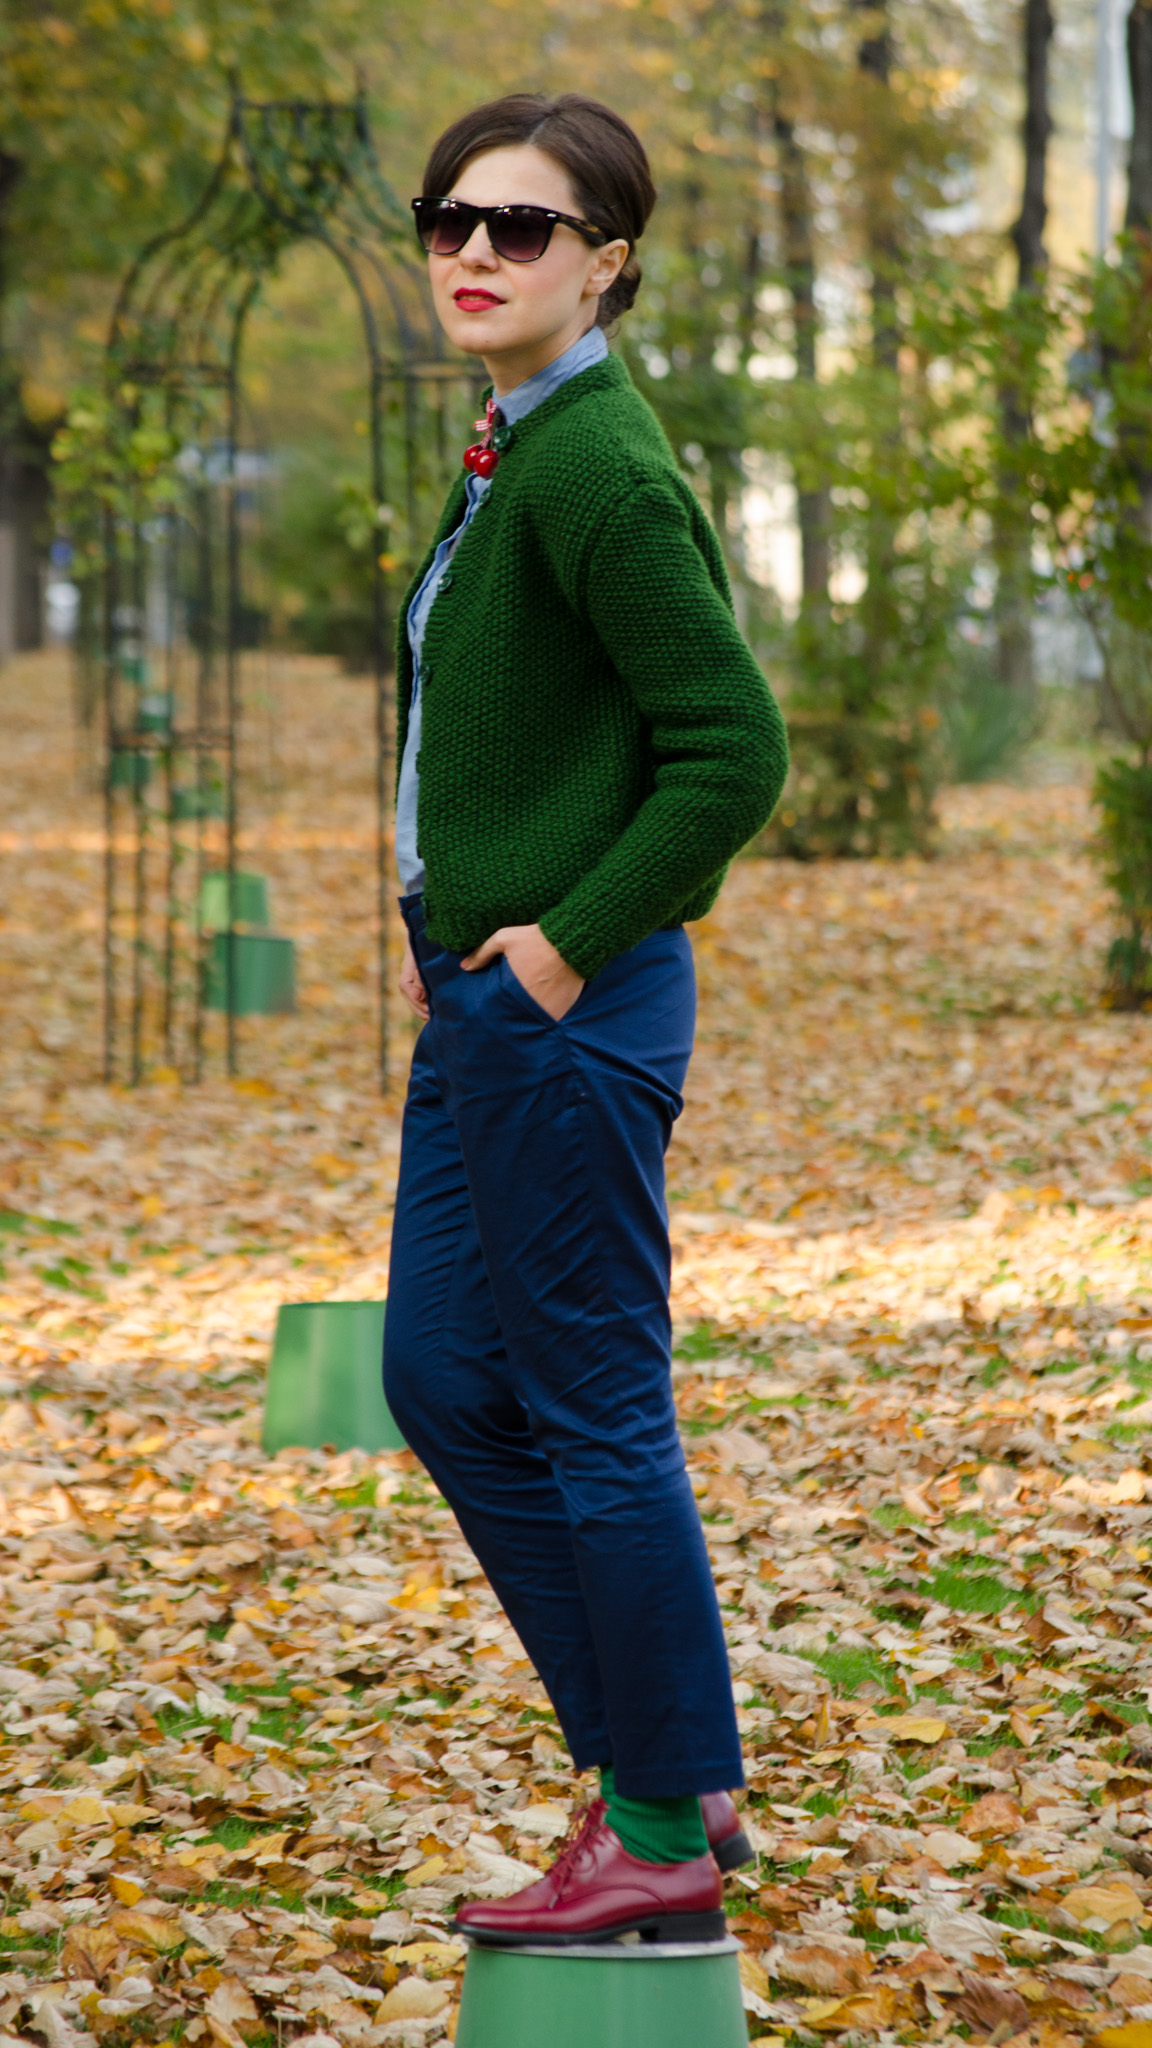 navy blue pants knitted green sweater shirt mustard square bag cherries h&m thrifted  burgundy man shoes oxford autumn scenery yellow leaves